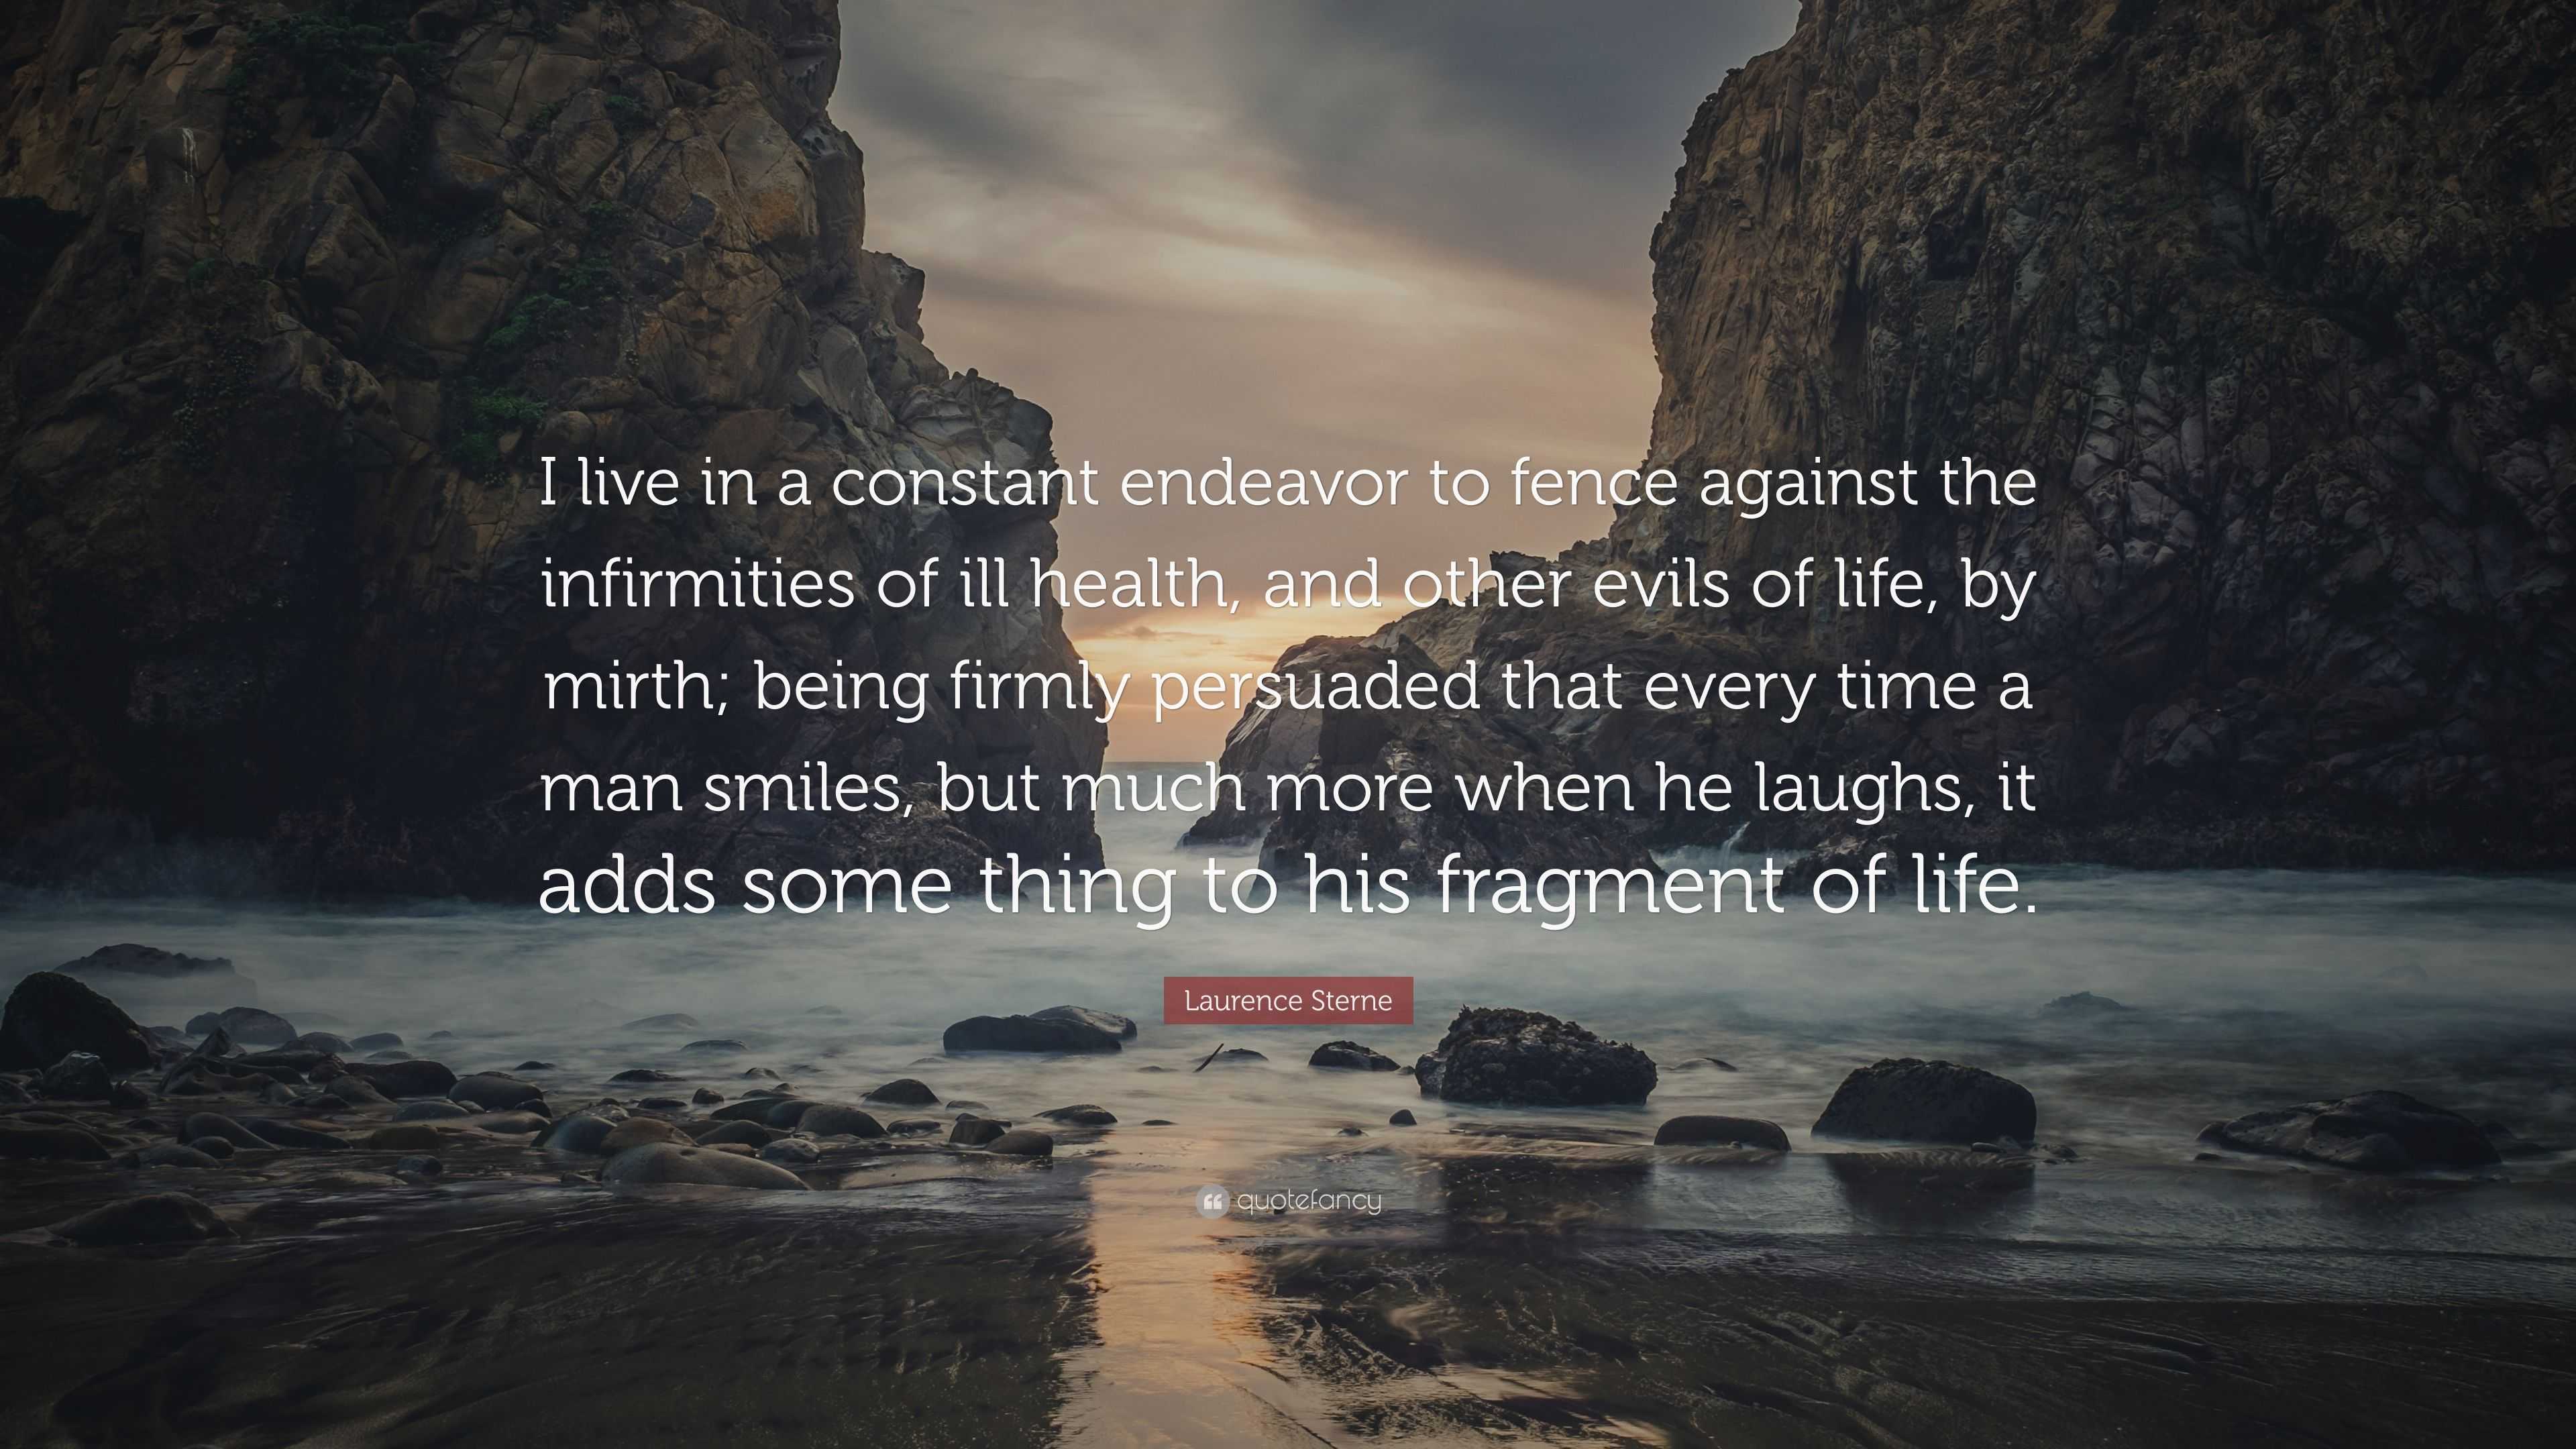 Laurence Sterne Quote: “I live in a constant endeavor to fence against ...